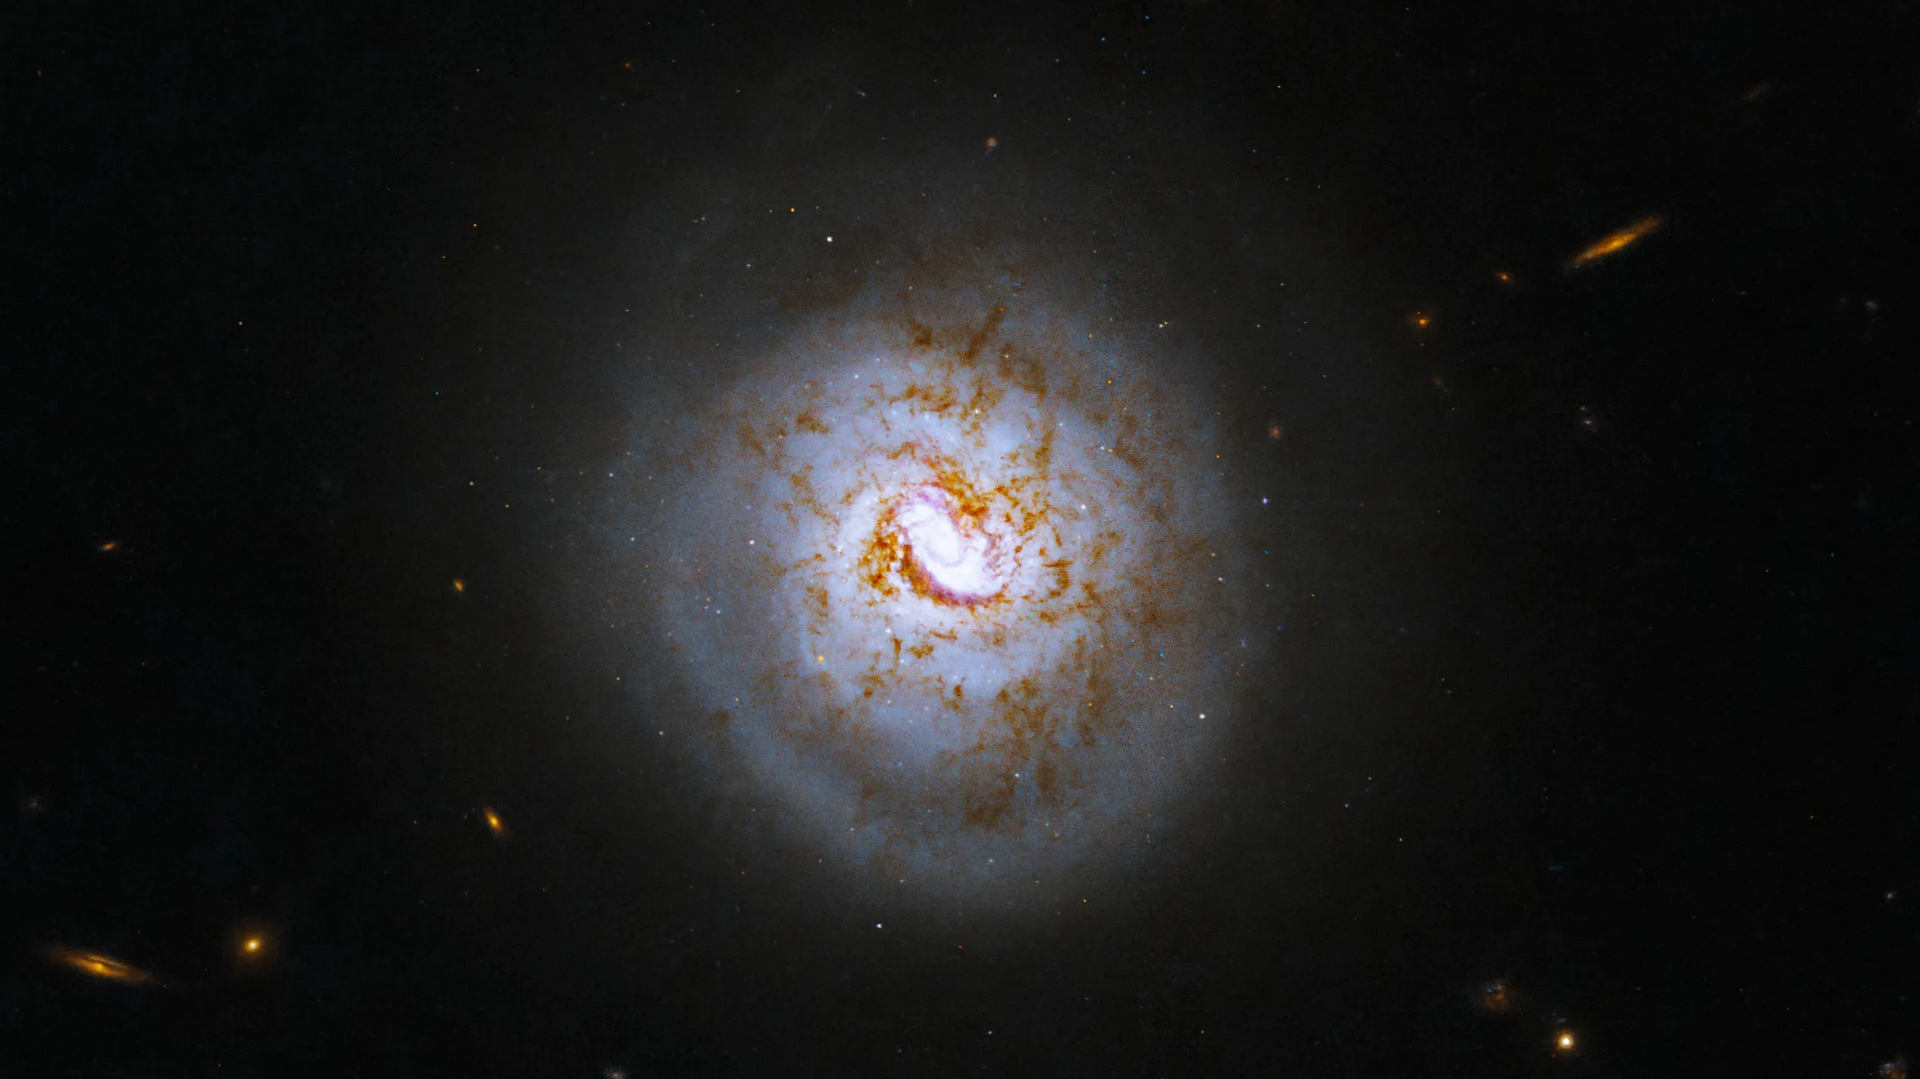 Hubble Captures an Image of Spiral Galaxy ESO 420-G013